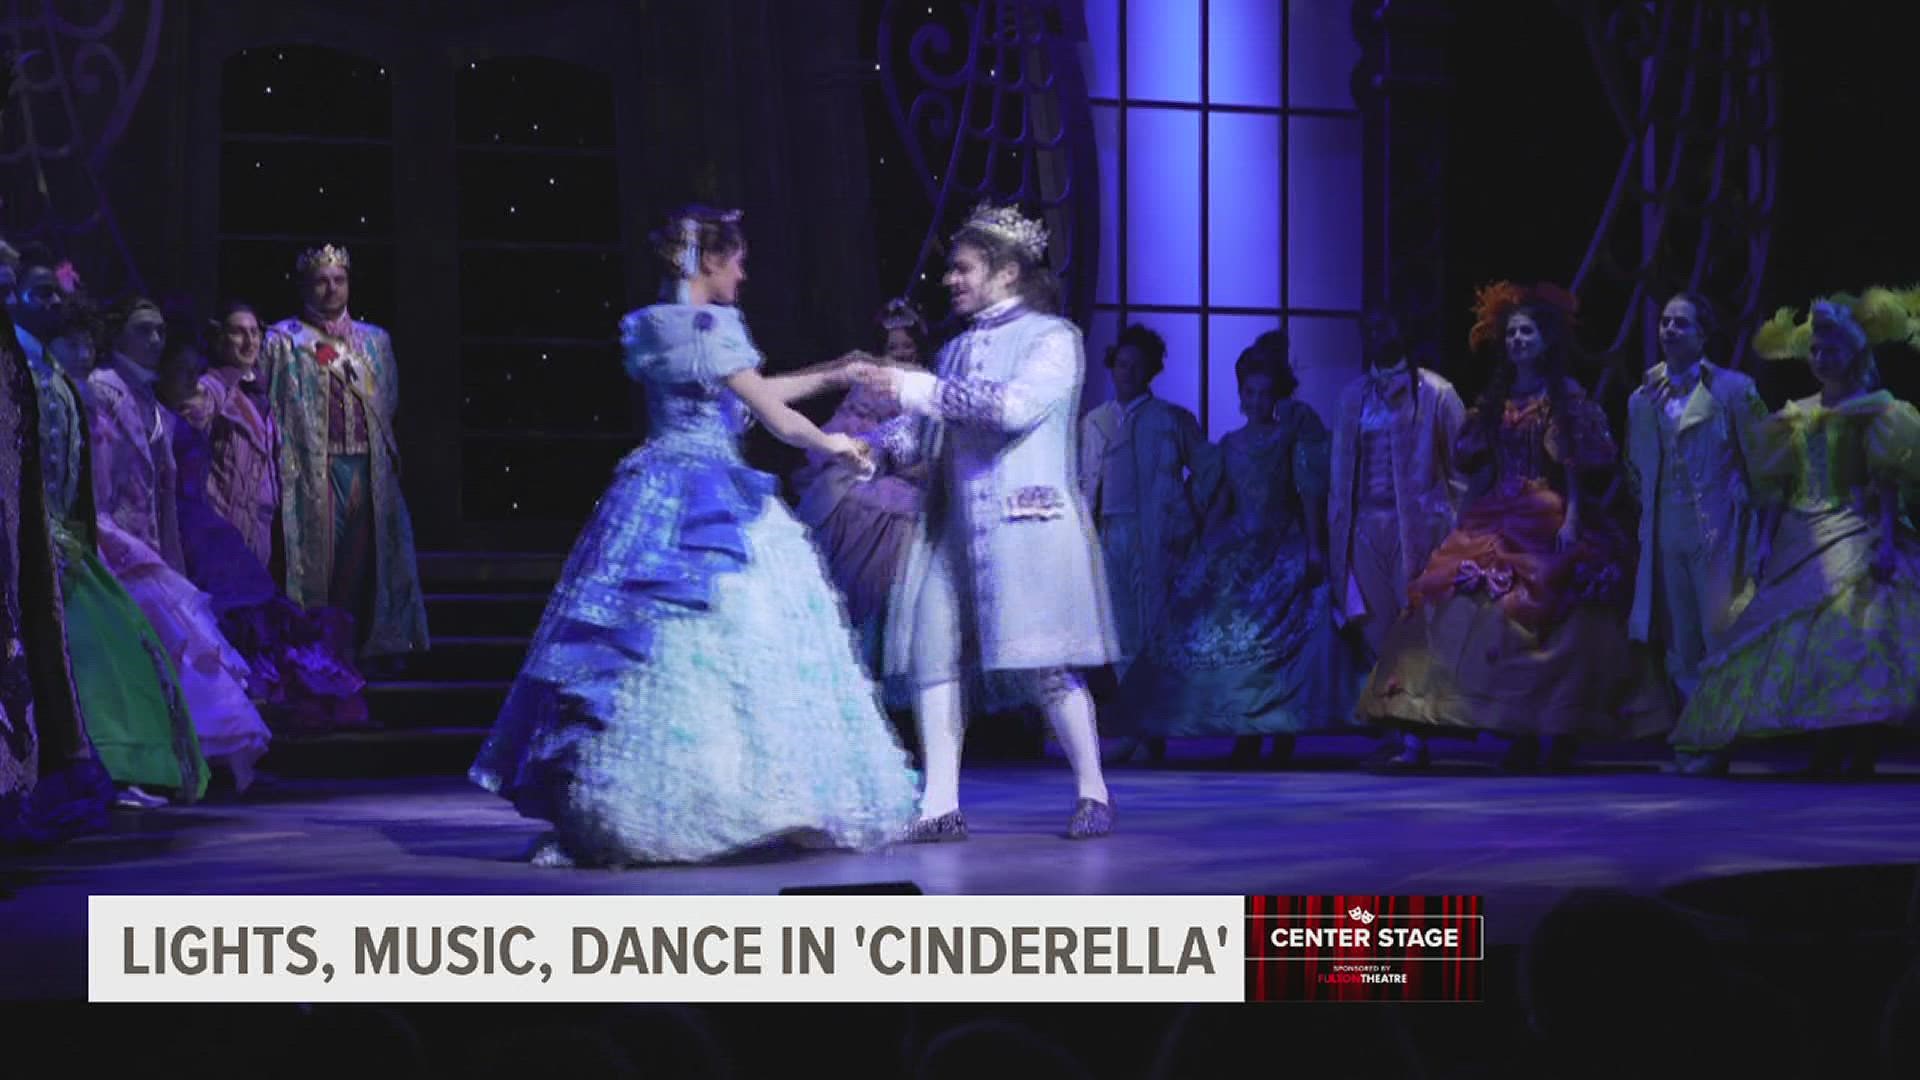 Anneliza Canning-Skinner, who plays the Fairy Godmother in the Fulton Theatre's production, joined FOX43 on Nov. 19 to discuss the show, and her role in it.